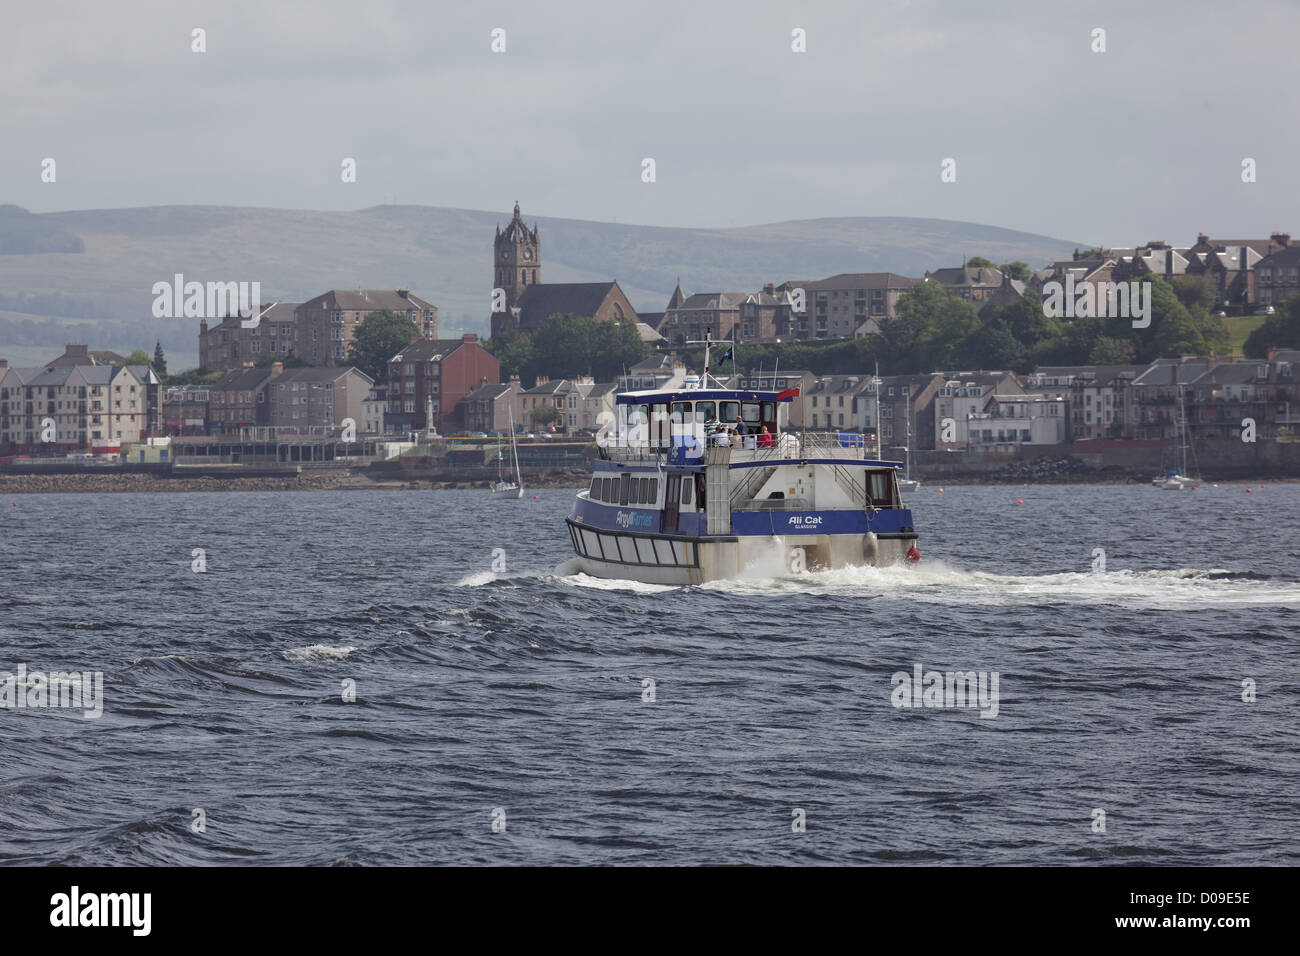 The Ali Cat ferry sails to Gourock from Dunoon Stock Photo